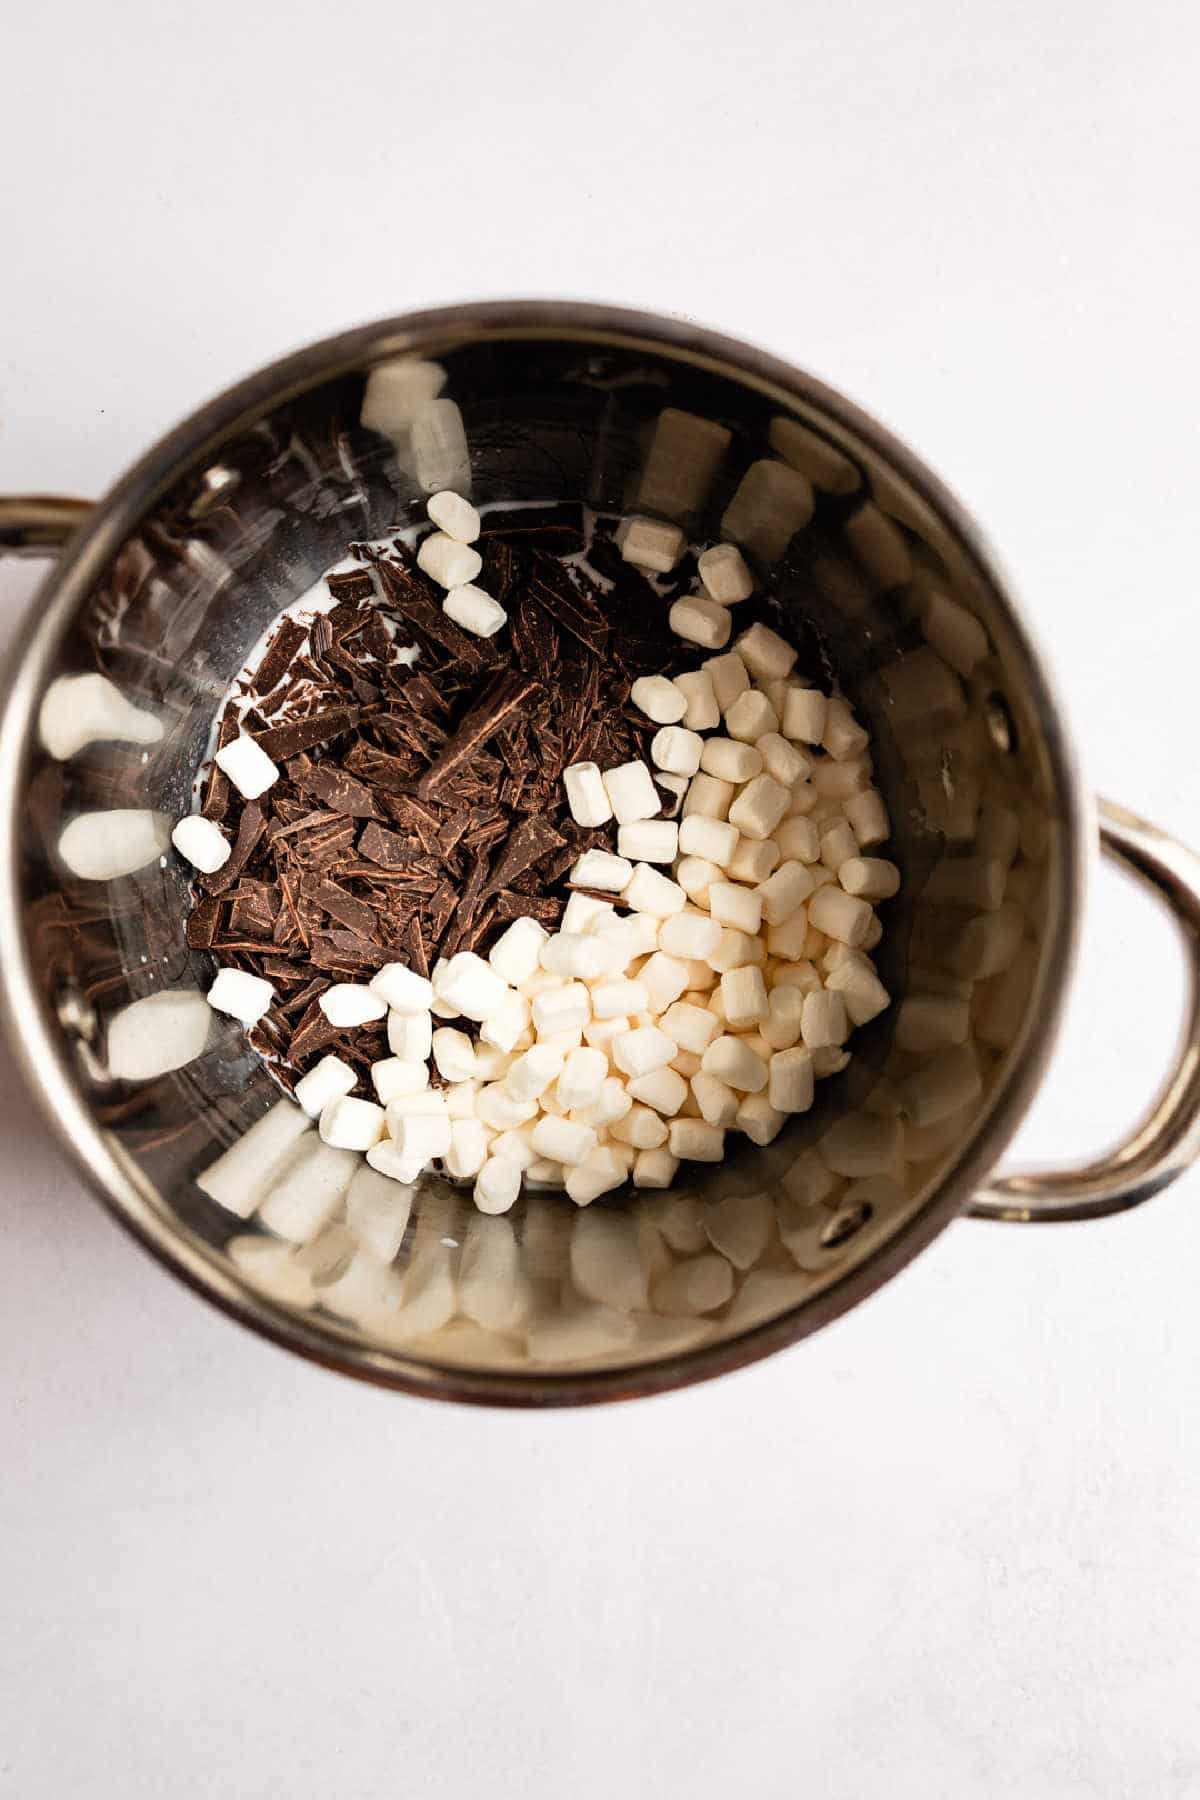 Marshmallows and chopped chocolate in a saucepan.